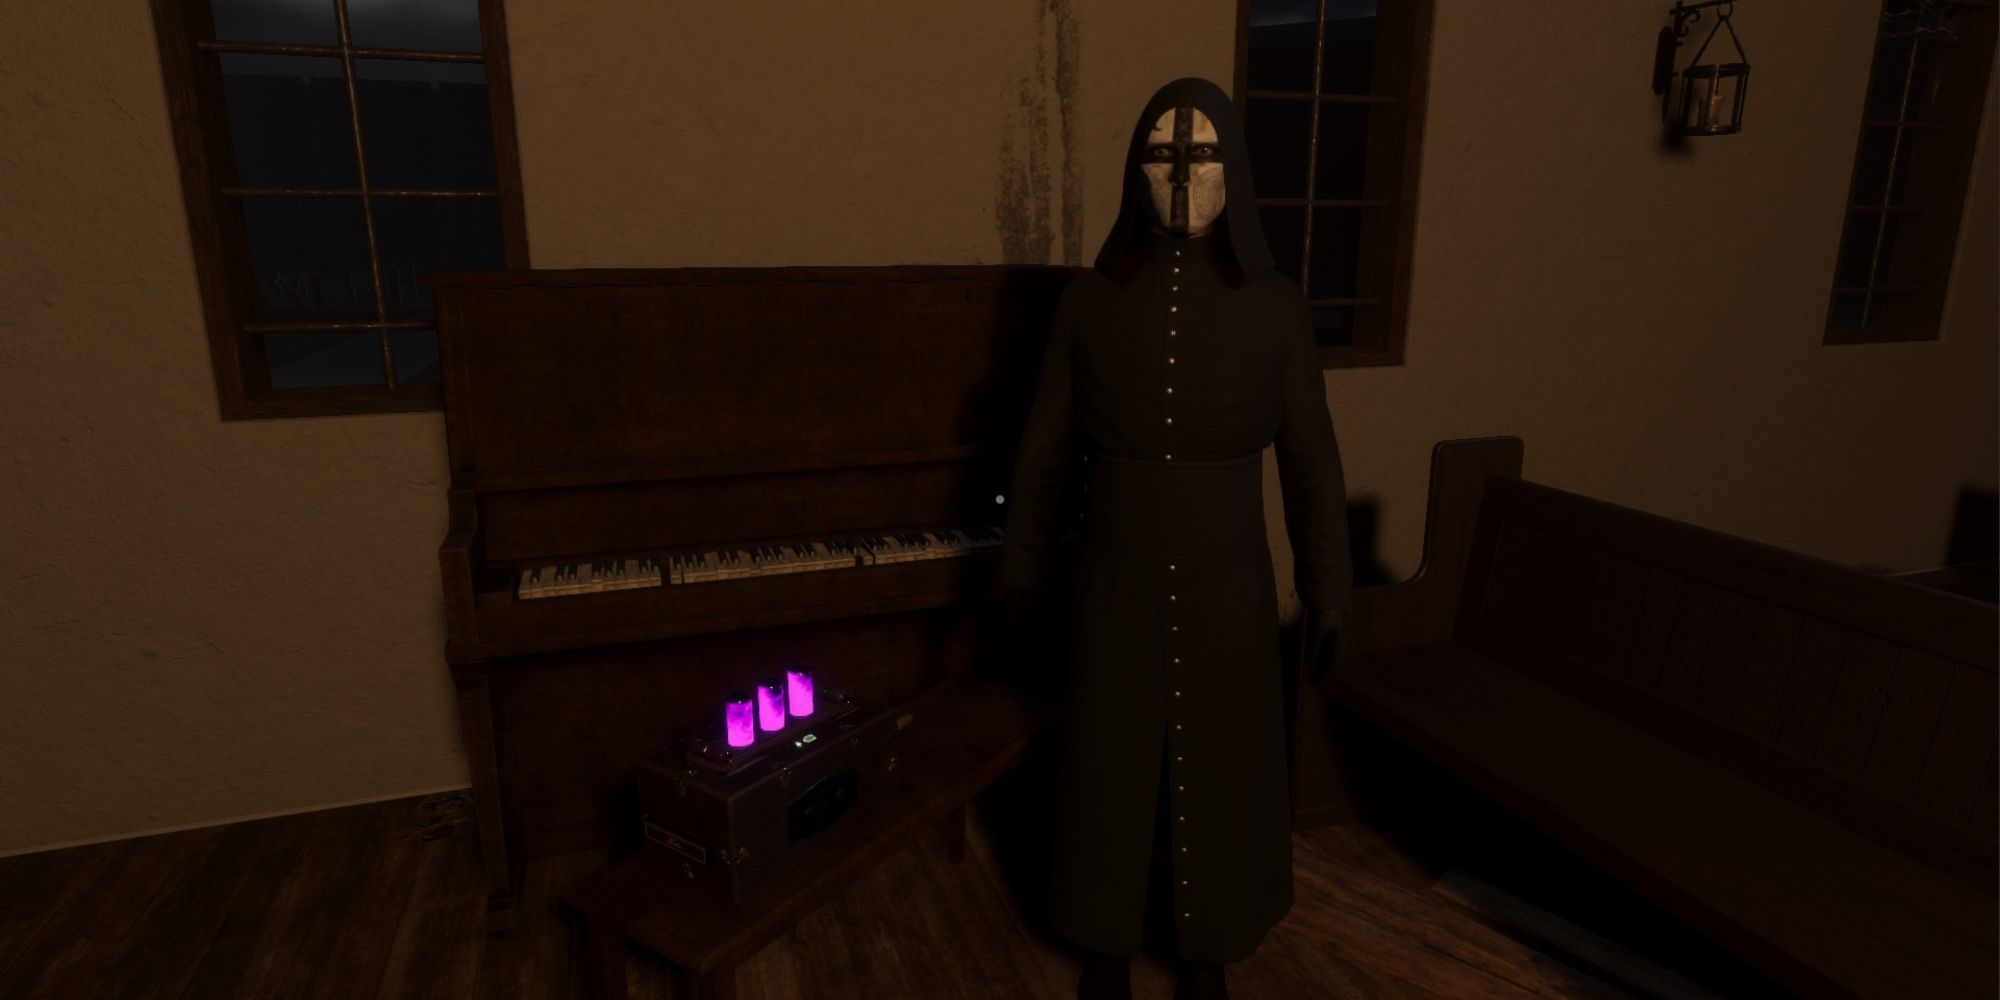 Masks of Deception player near piano